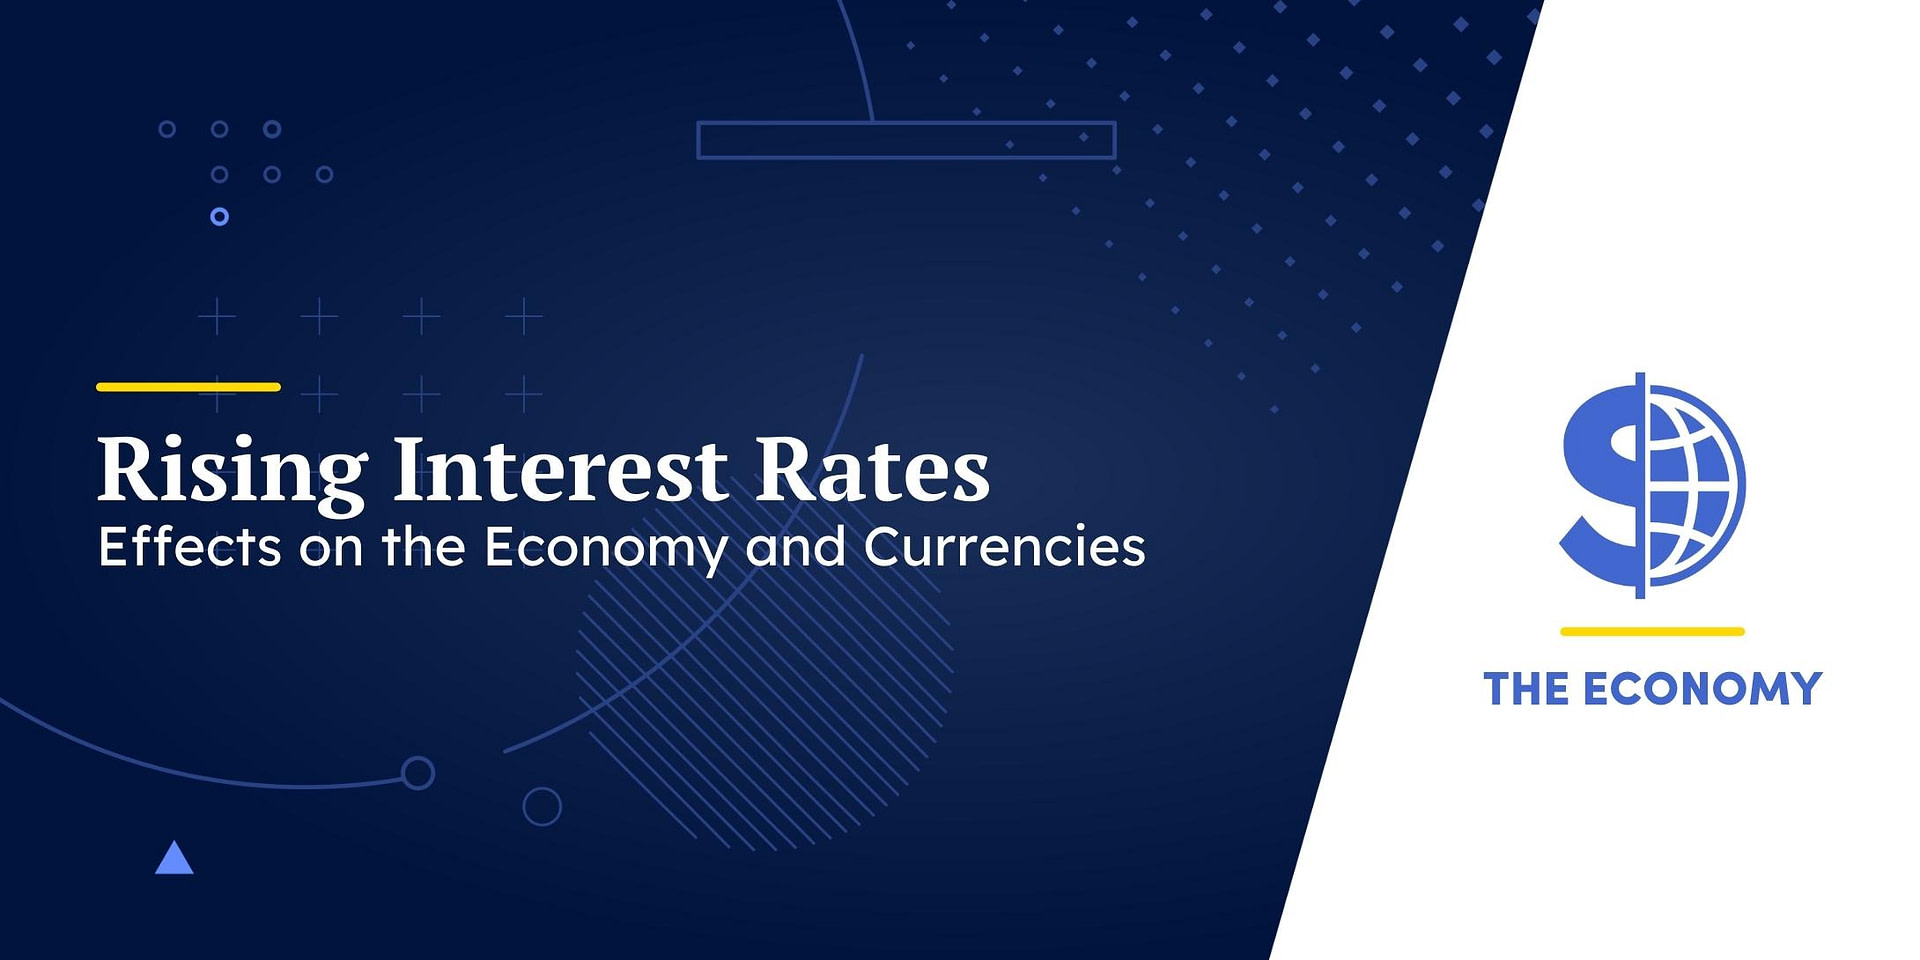 Rising Interest Rates: Effects on the Economy and Currencies